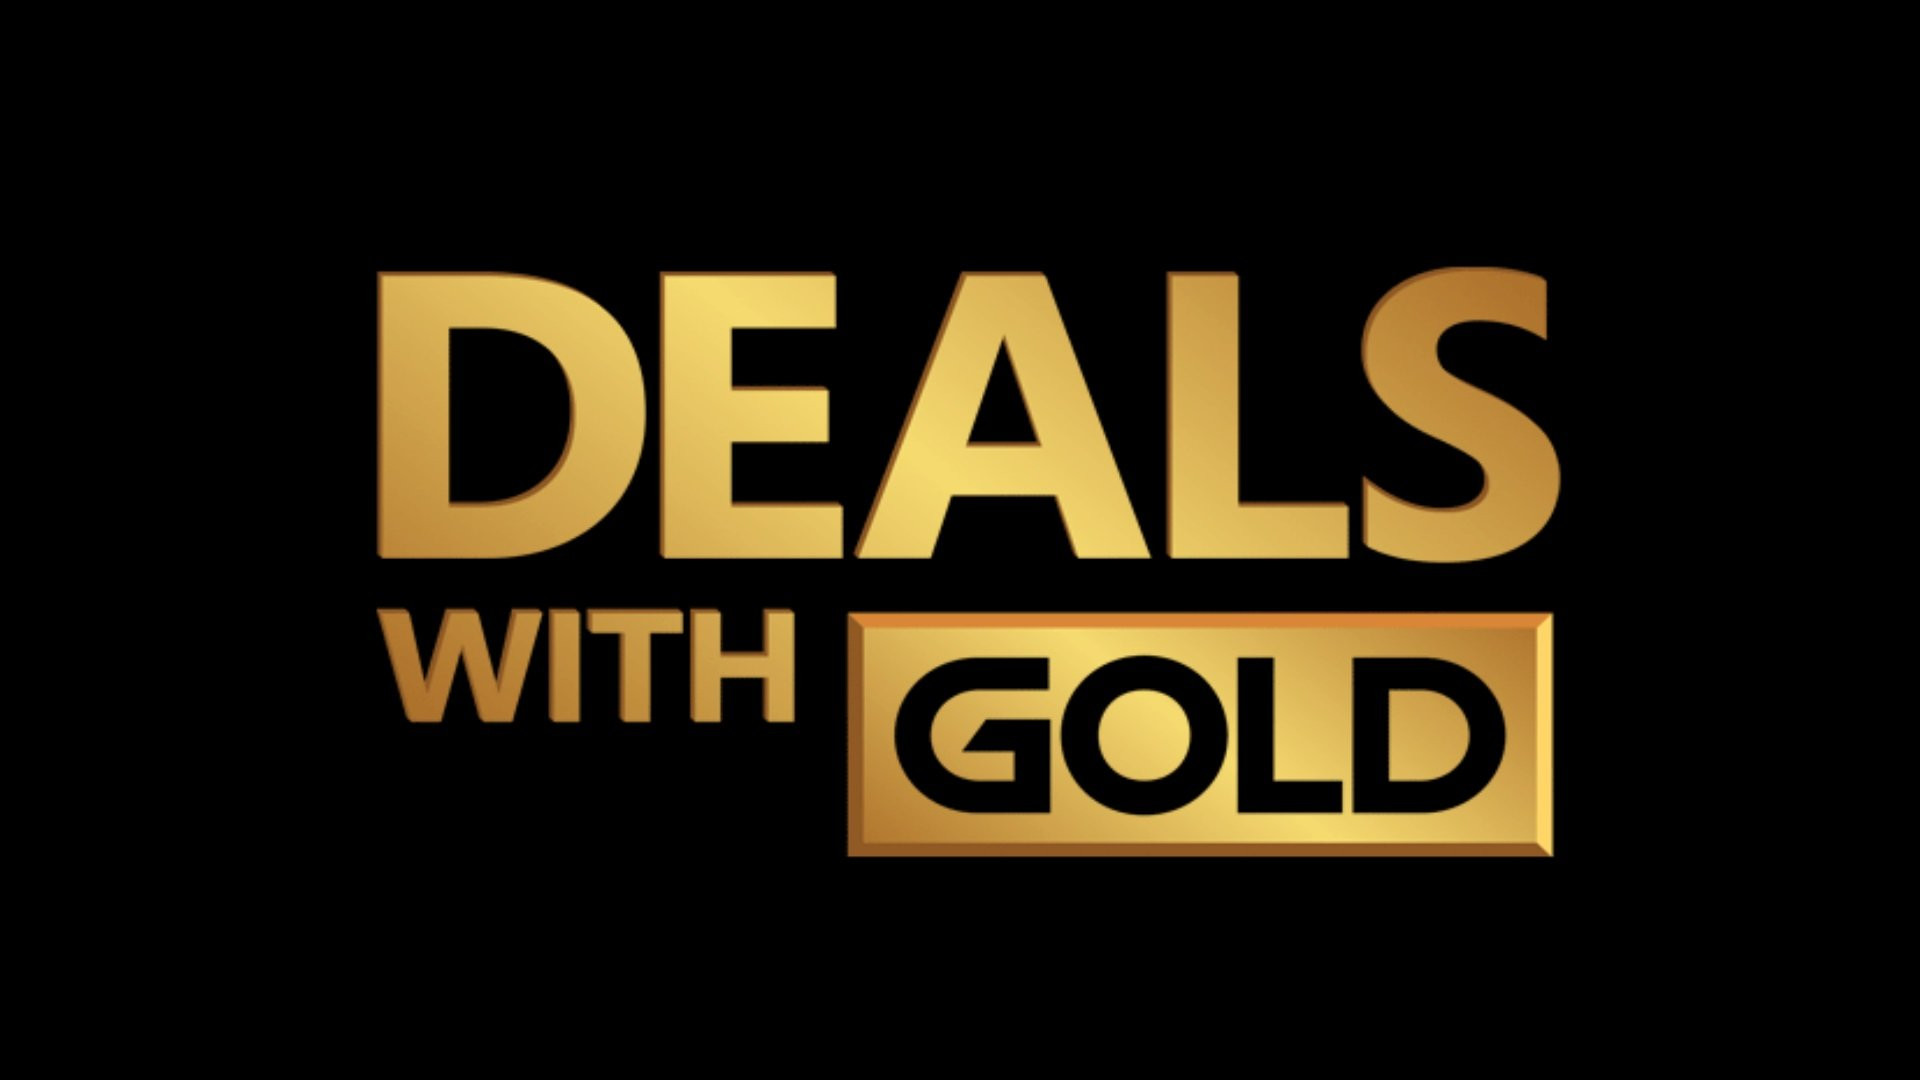 Deals with Gold semaine 49